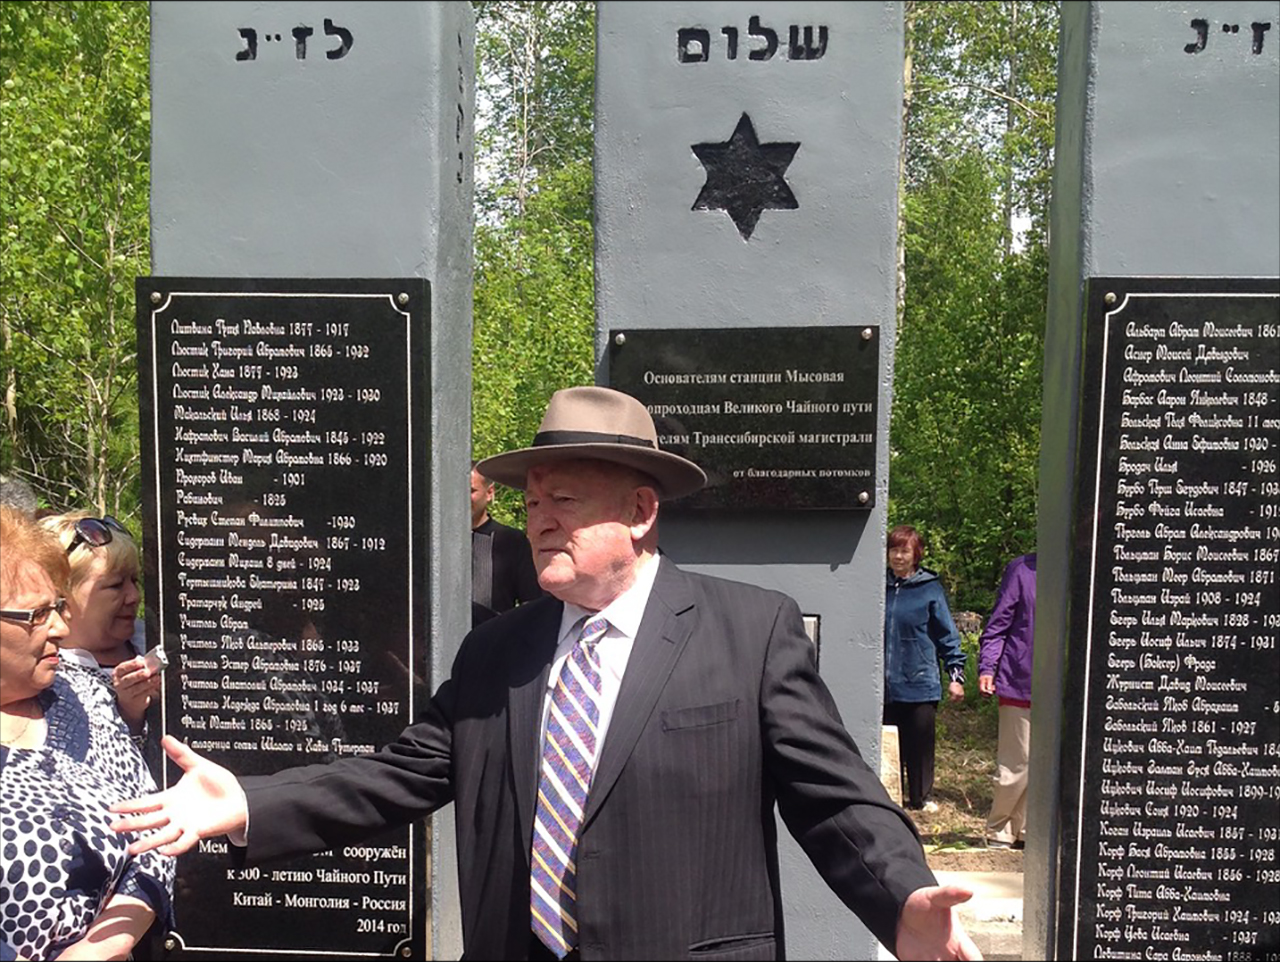 man standing in front of monunment with Star of David and plaques of names